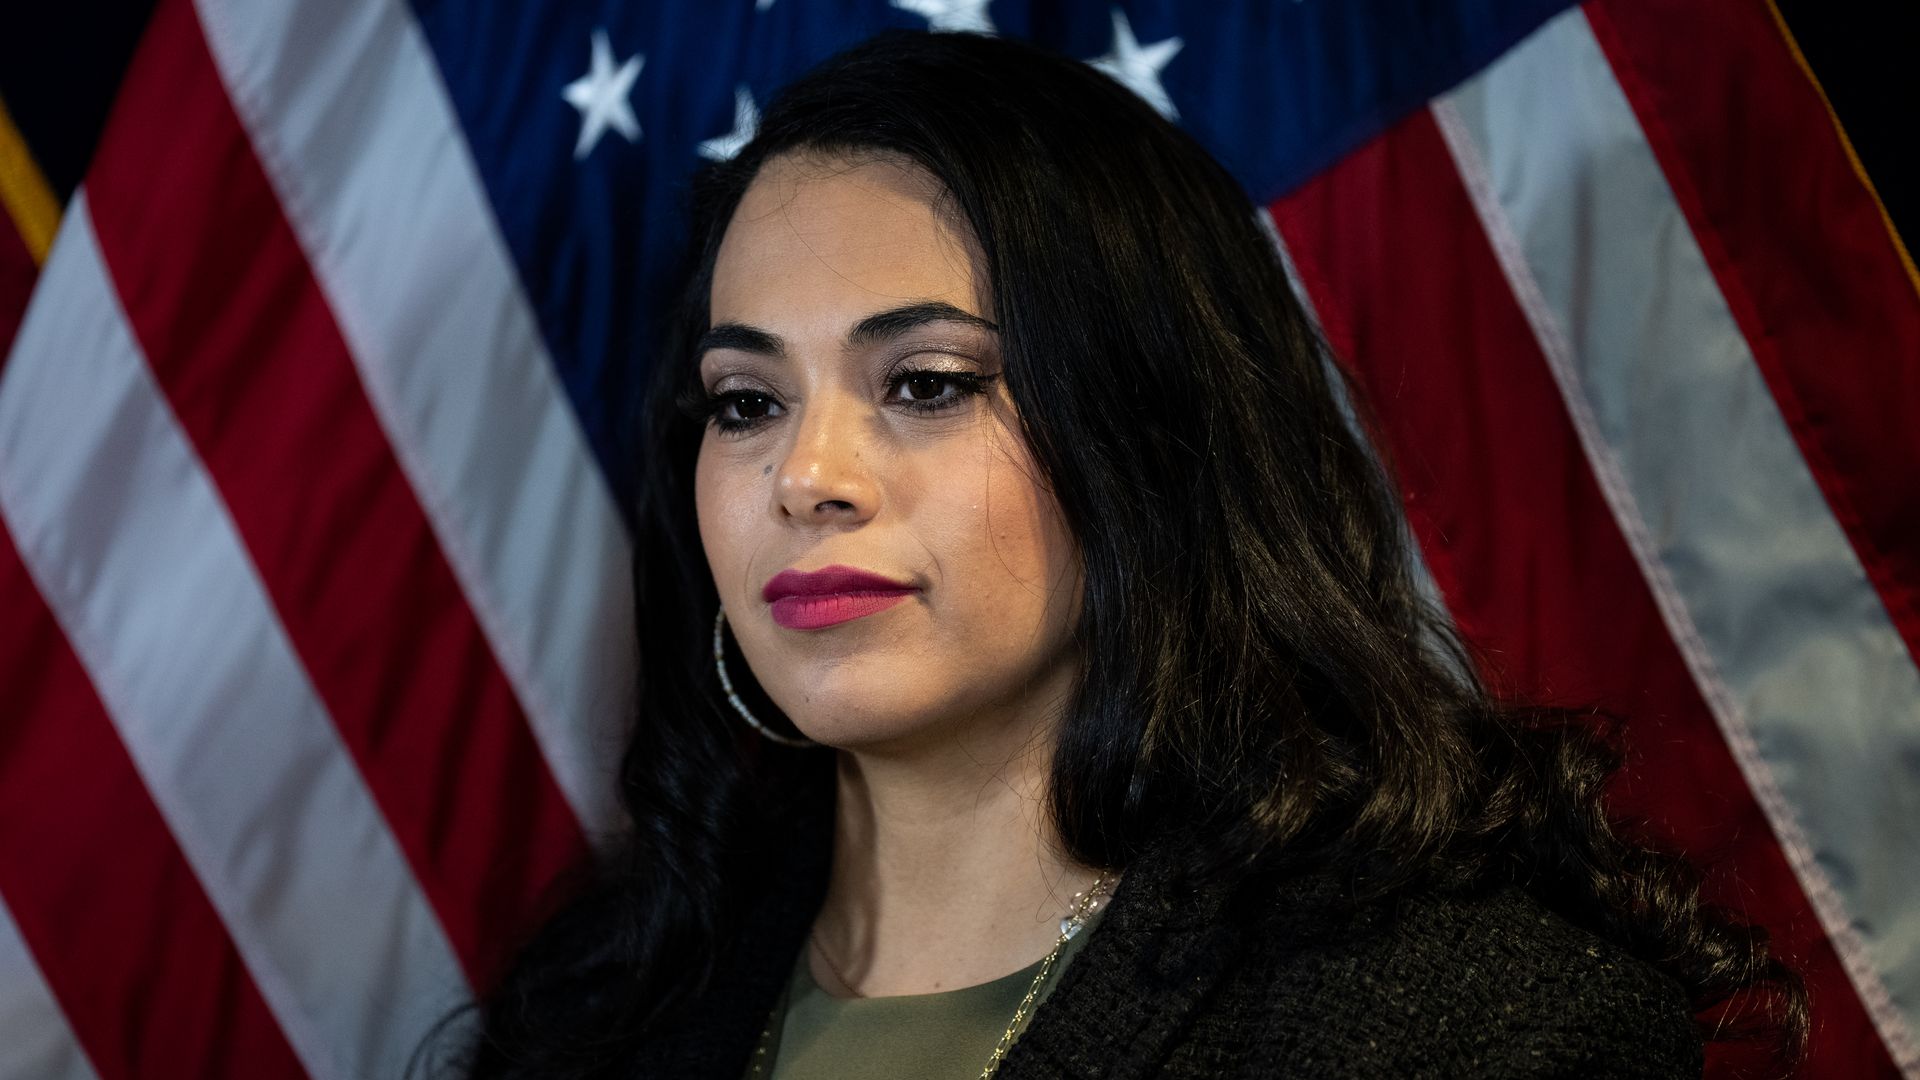 Congressional candidate from Texas Mayra Flores participates in the news conference  in Washington on Tuesday, May 17.